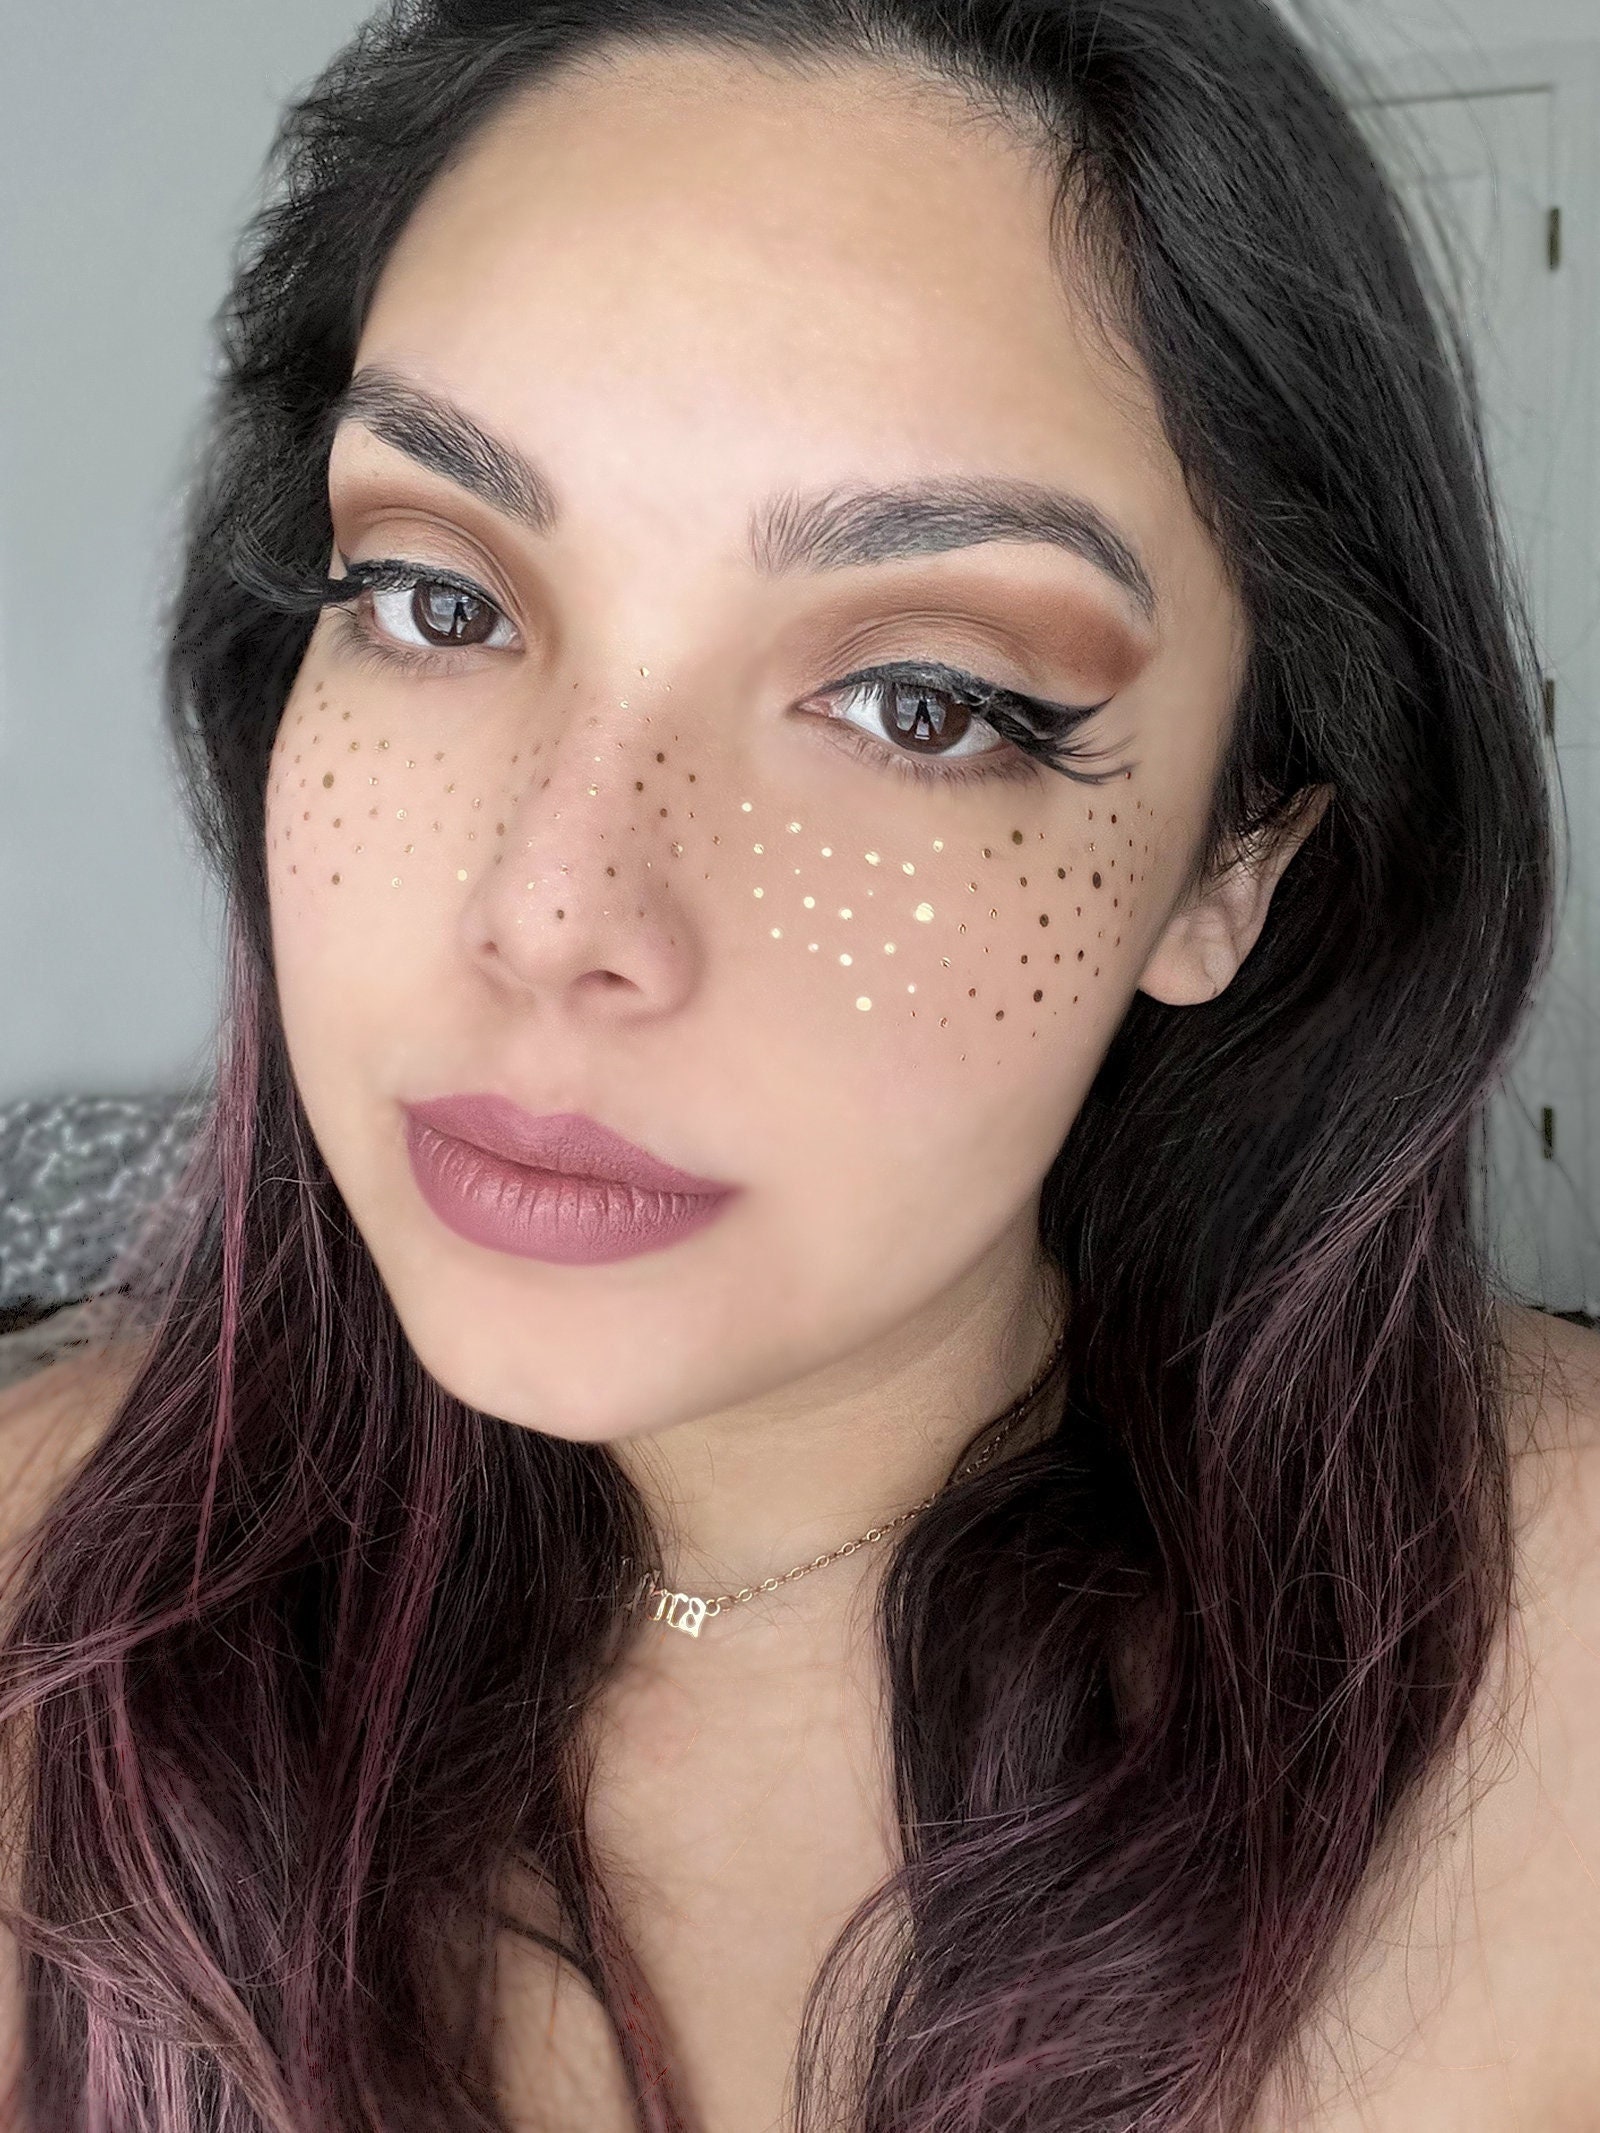 Gold Freckles Face Tattoo Sticker Temporary/ Henna Freckles/ photo